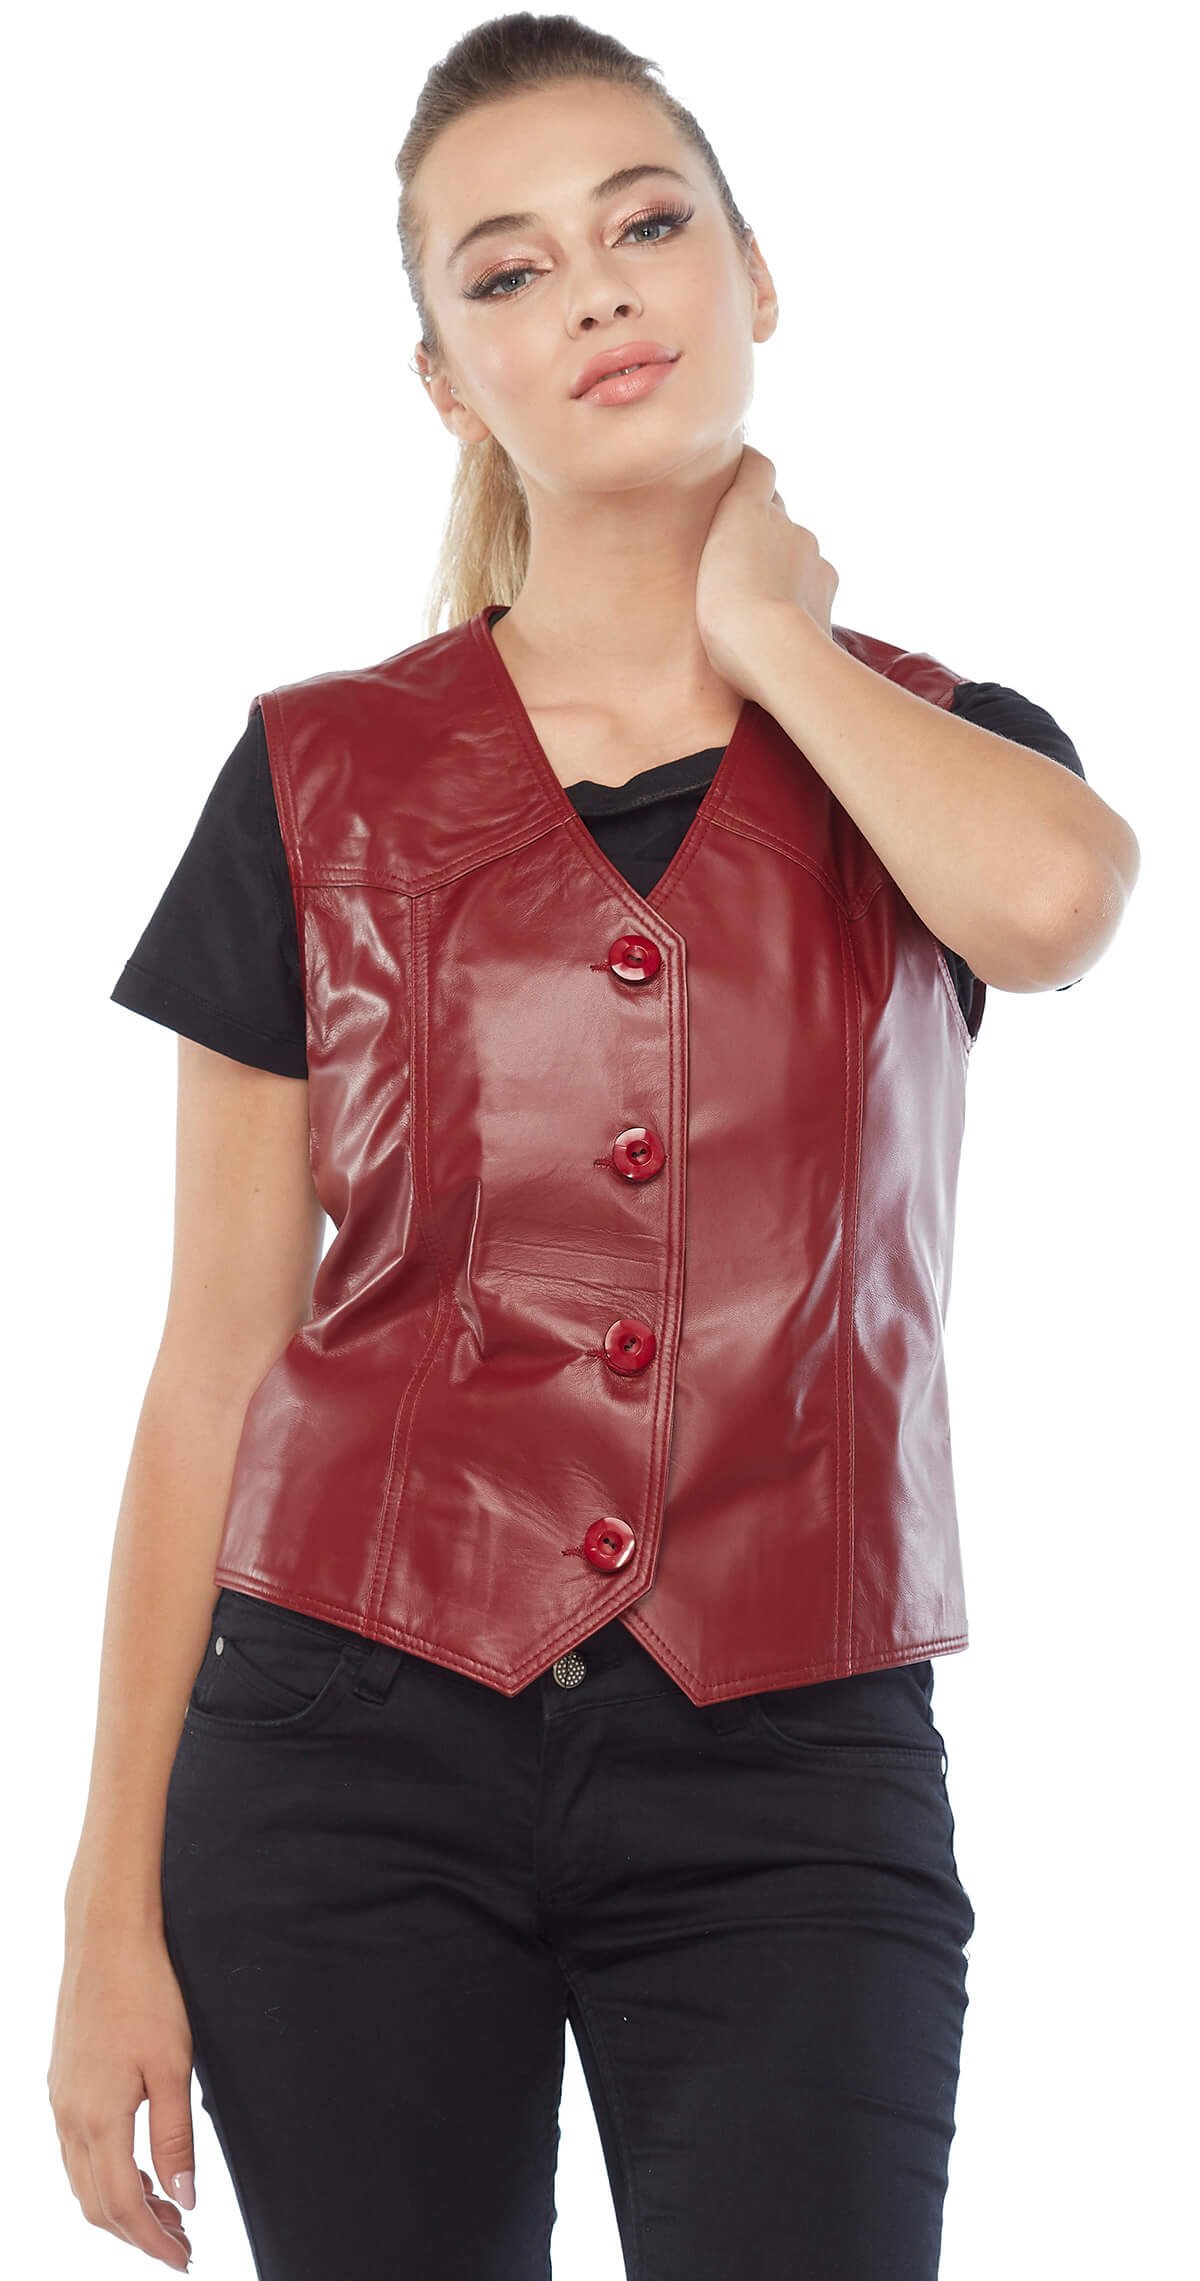 Genuine Leather Women's Leather Vest Red